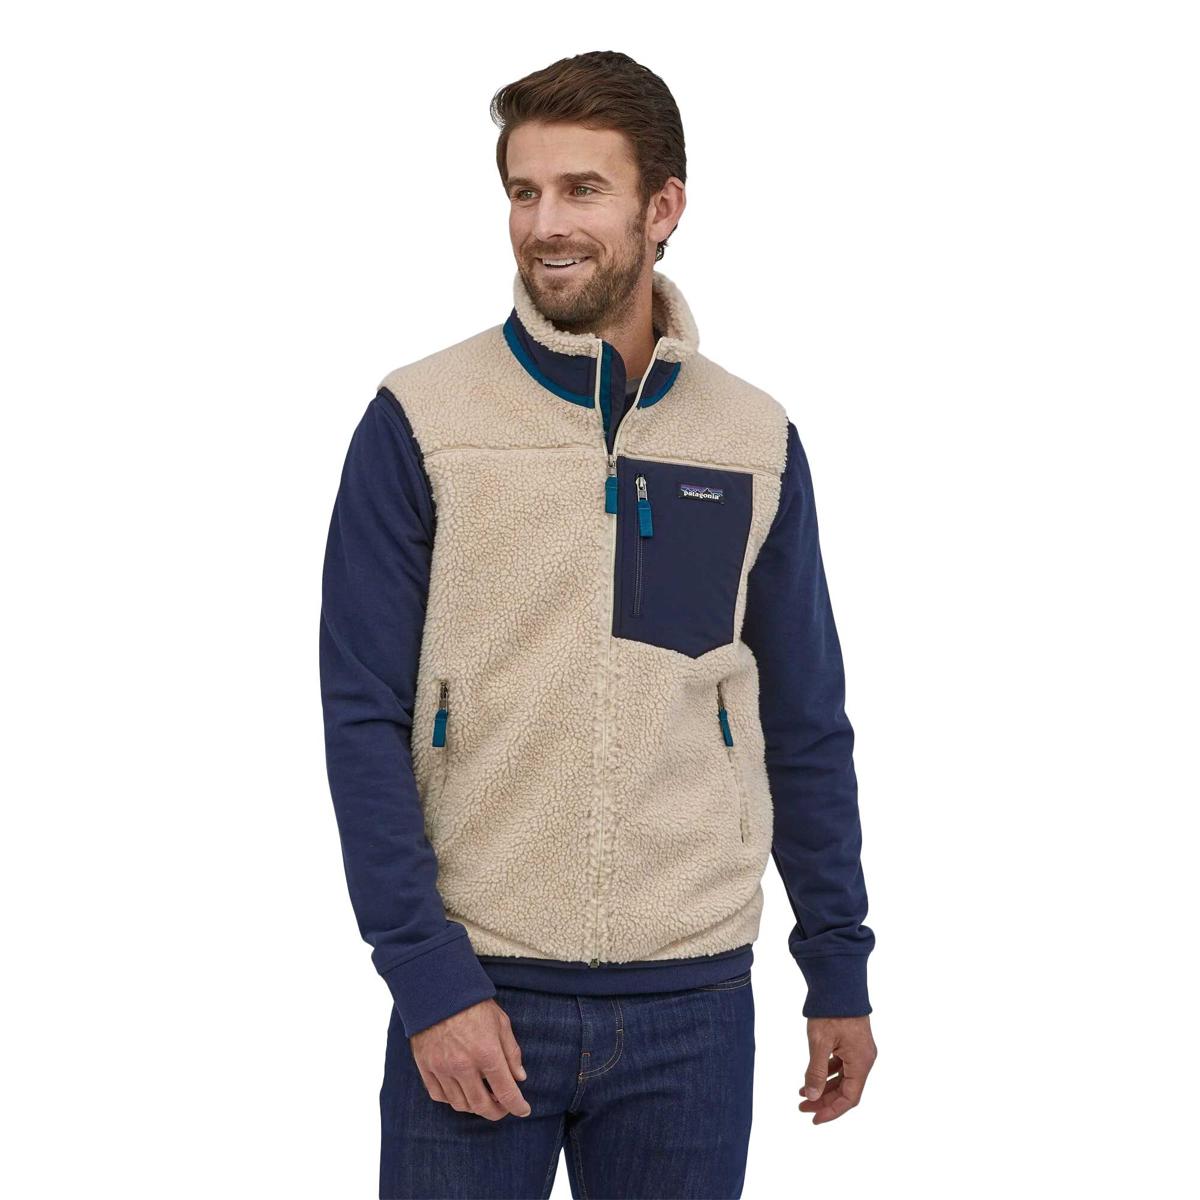 Patagonia Mens CLASSIC RETRO-X VEST WHITE - Winter Apparel, Skiing, Hiking  and Running from Top Brands - Paragon Sports